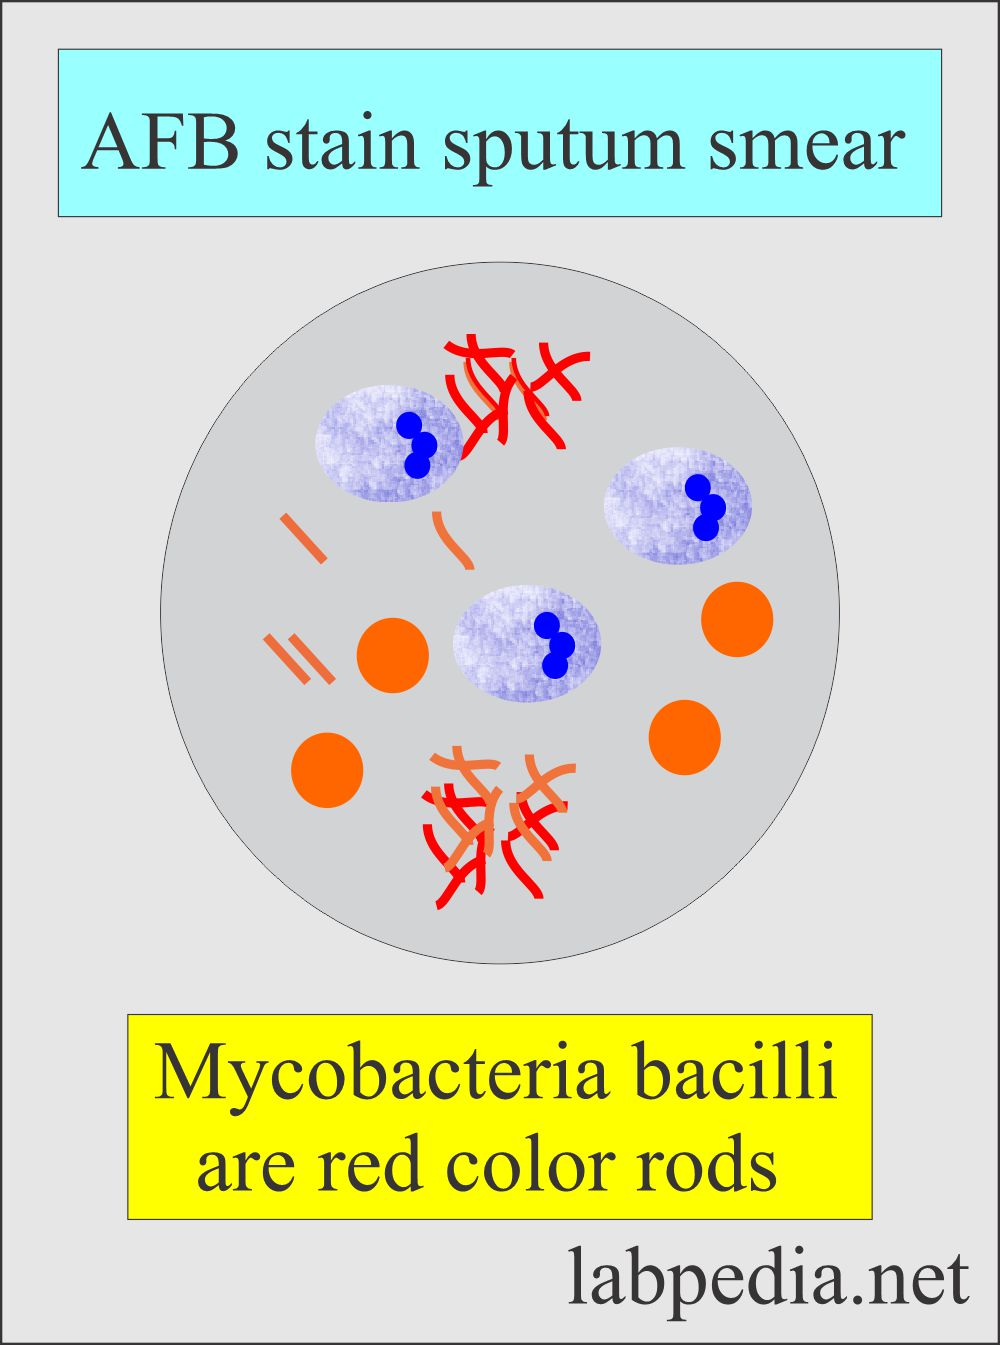 TB bacilli with AFB stain